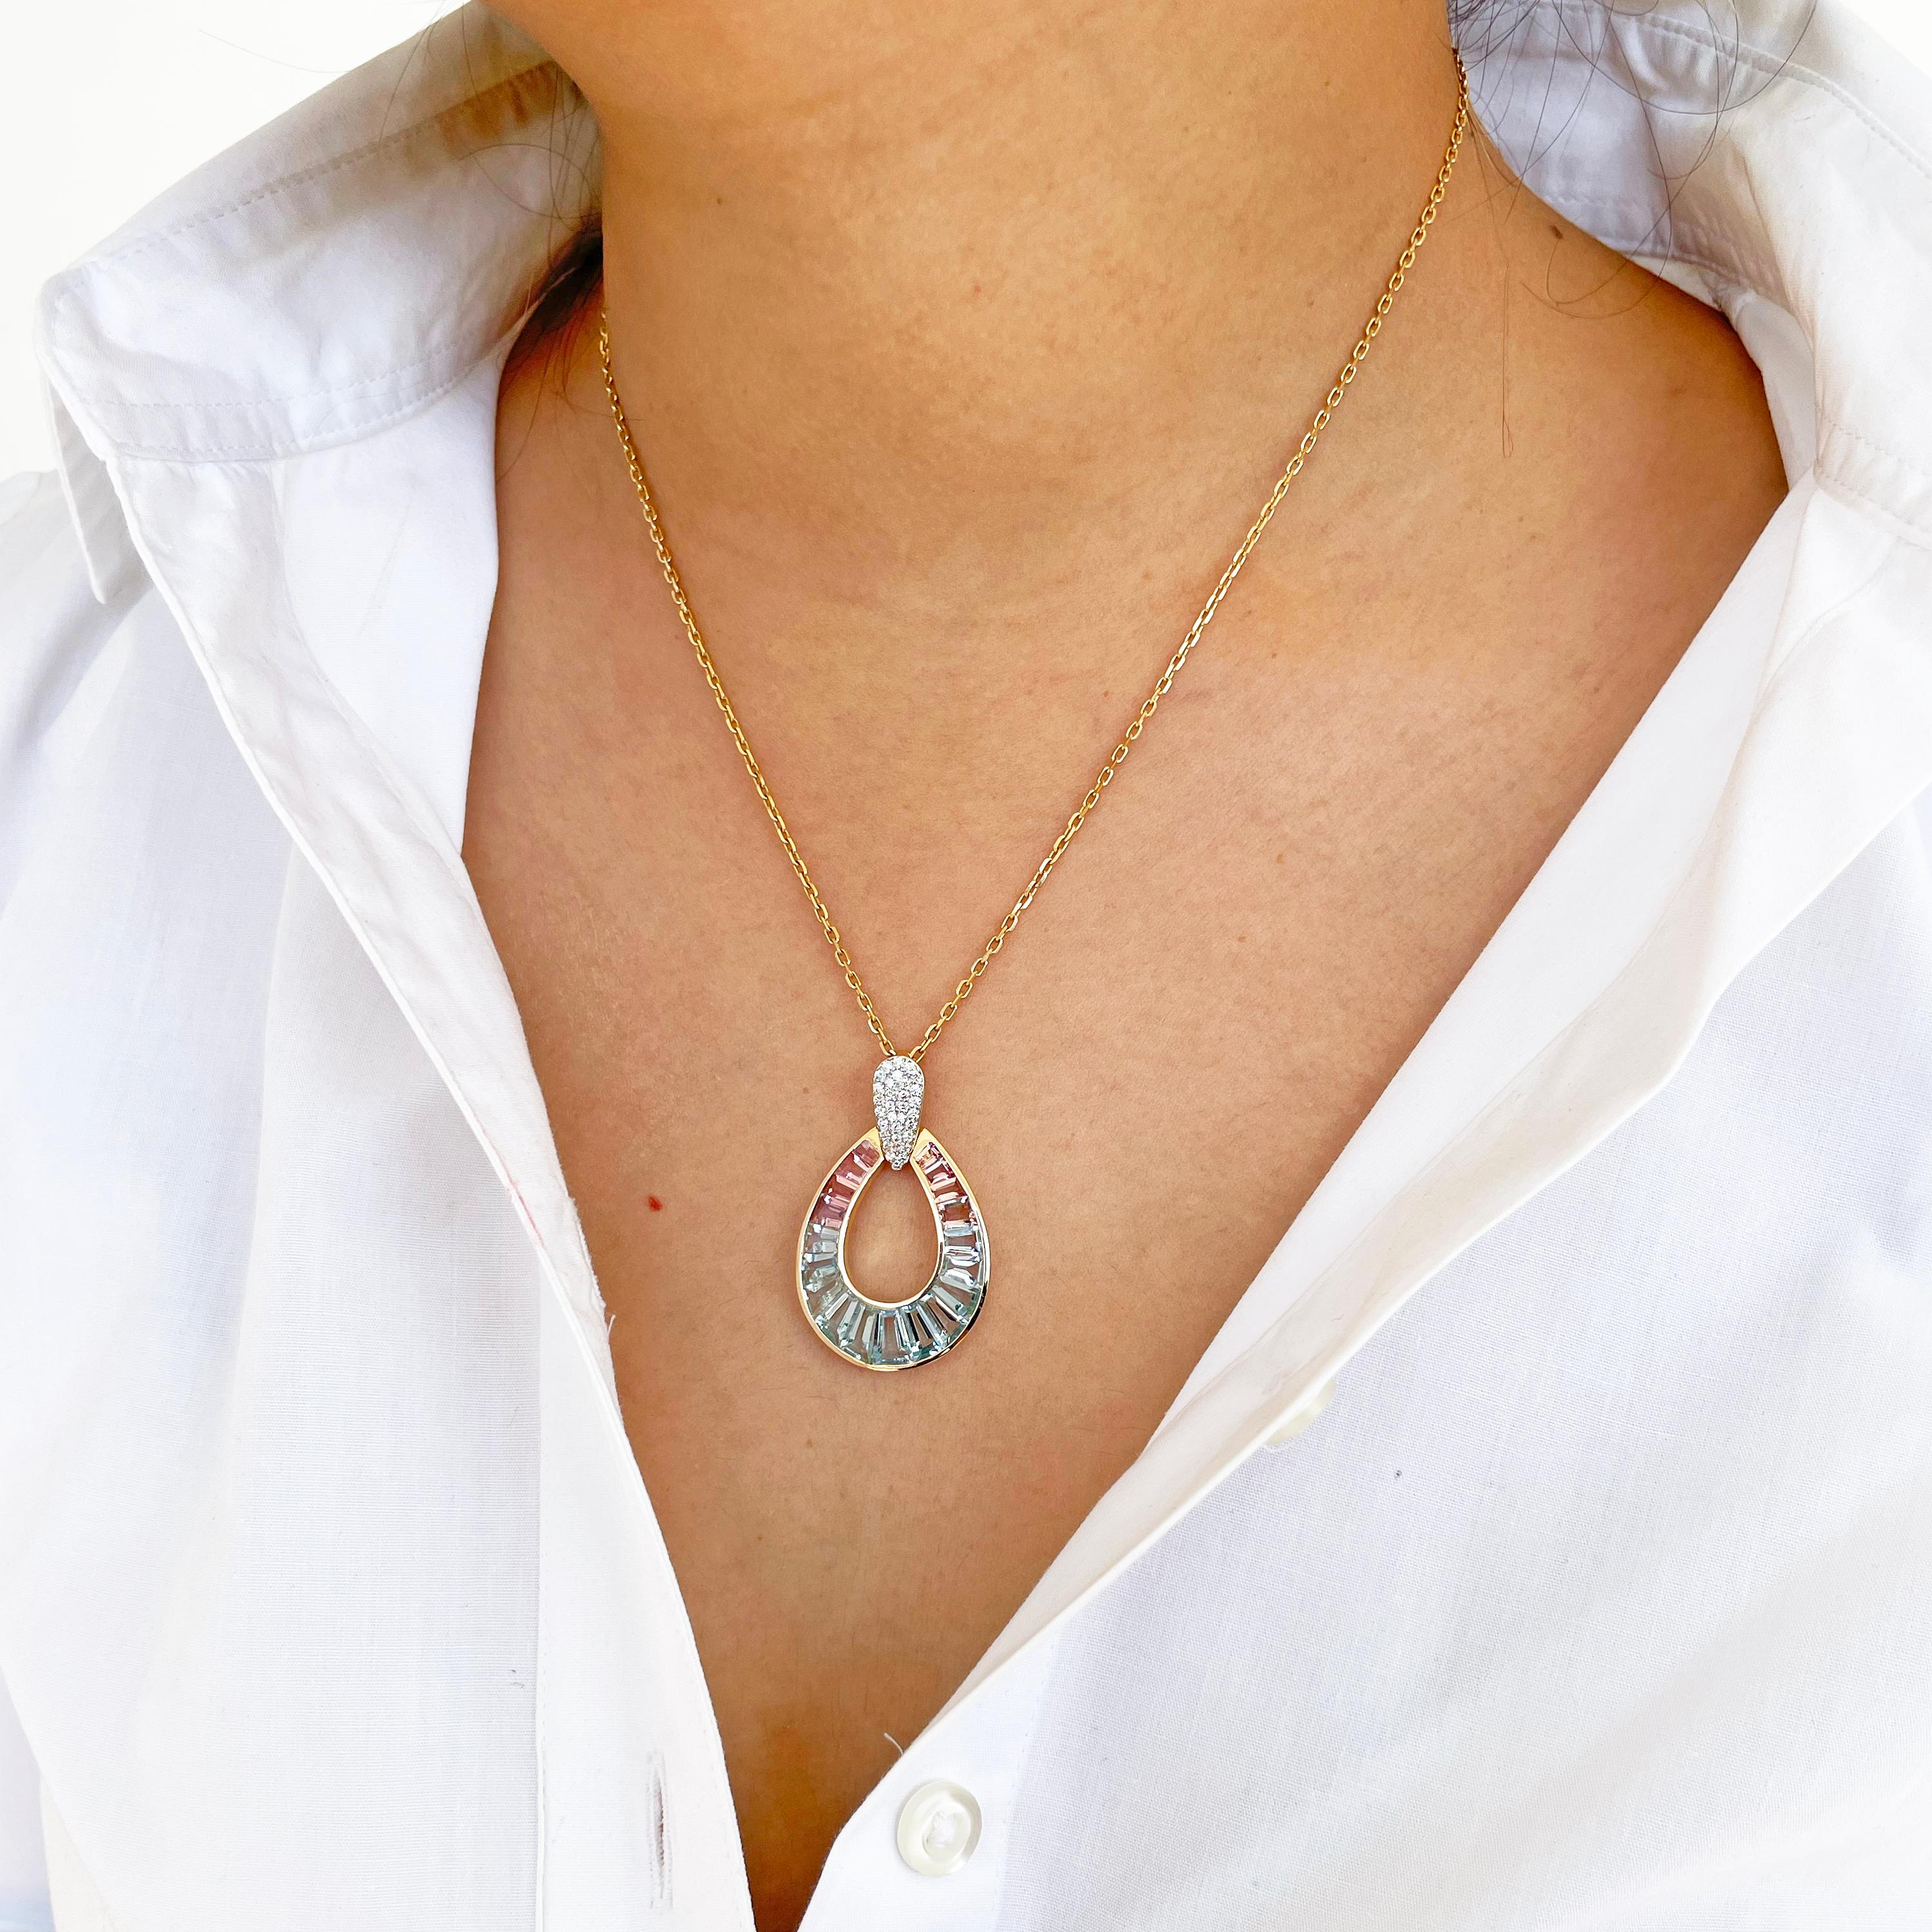 18 karat gold taper baguette aquamarine pink tourmaline raindrop diamond pendant necklace.

Absolutely stunning, this aquamarine pink tourmaline pendant is set in 18 karat gold using best international alloys. The perfectly crafted tear drop or as